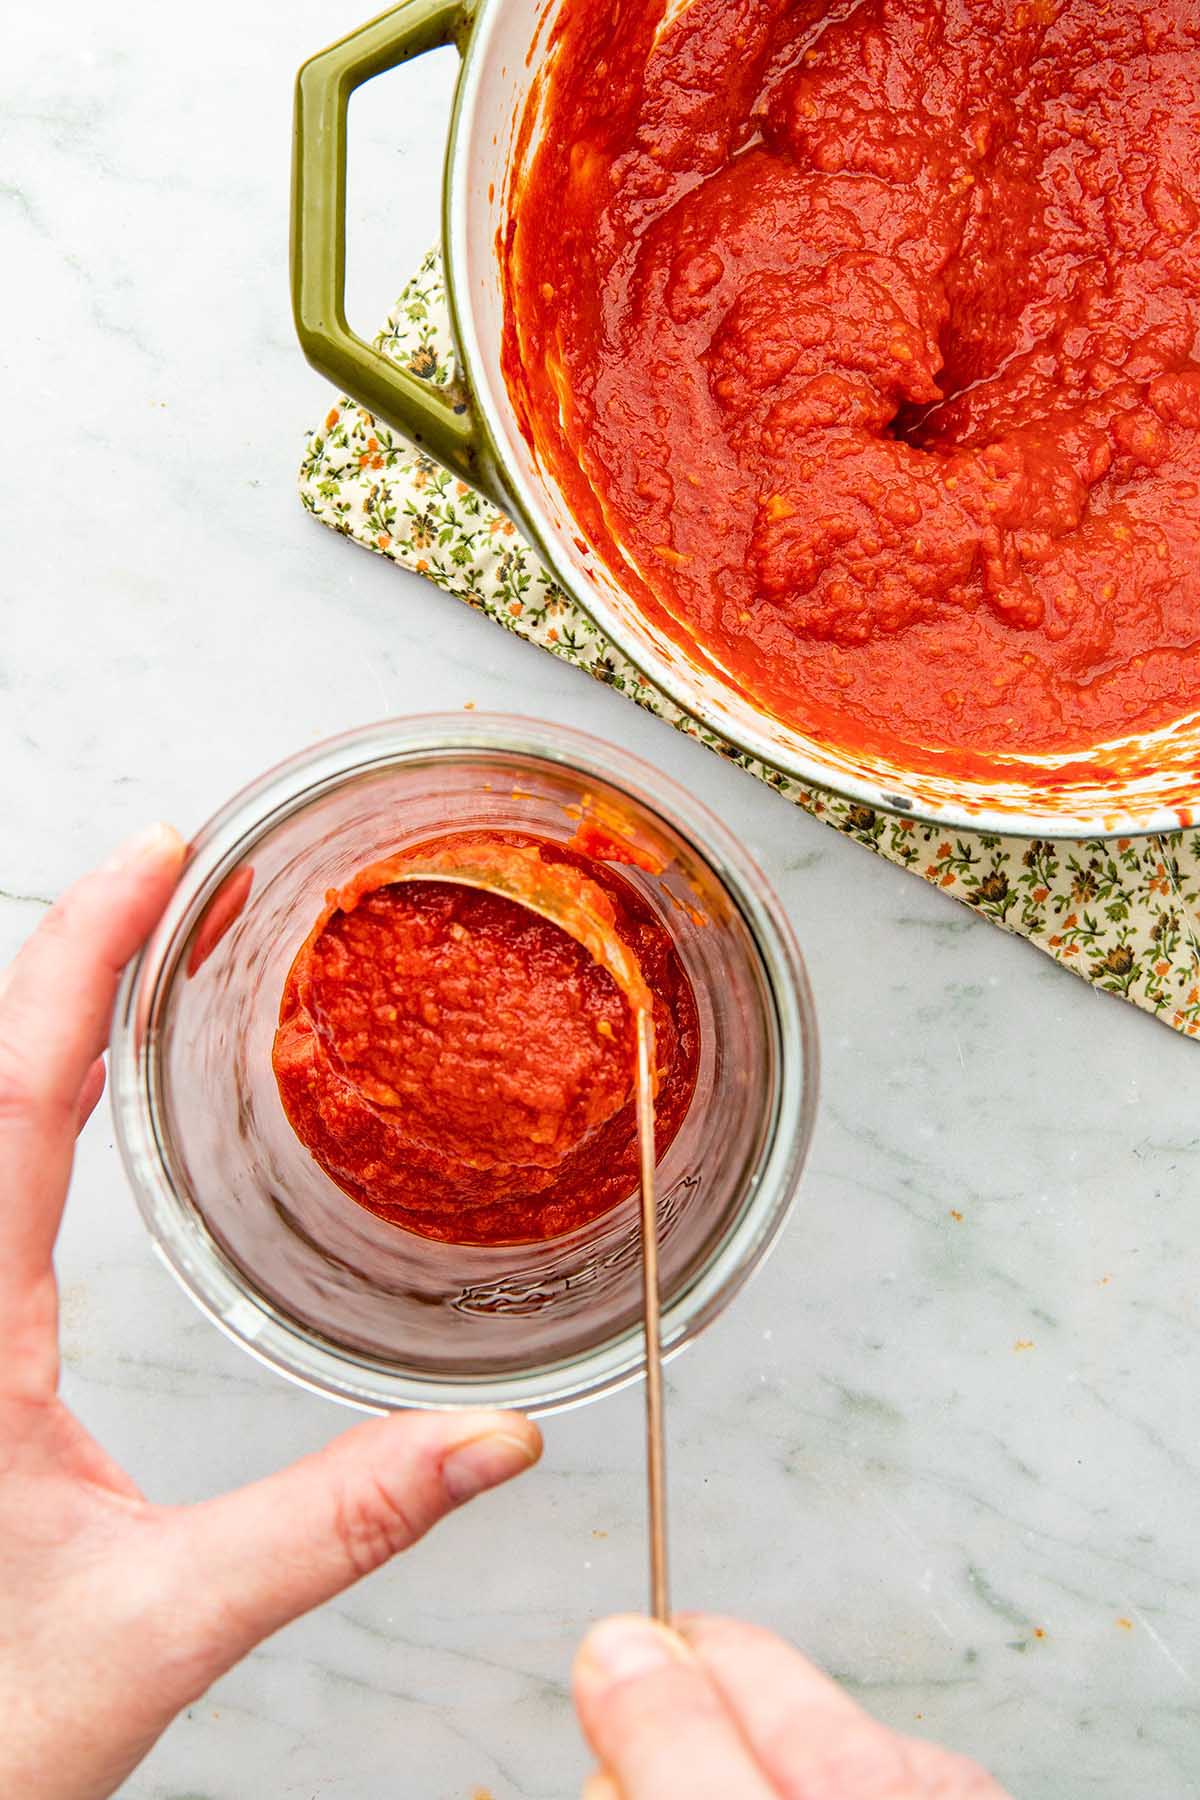 A hand ladling tomato sauce into a glass jar with the pot of cooked sauce nearby.